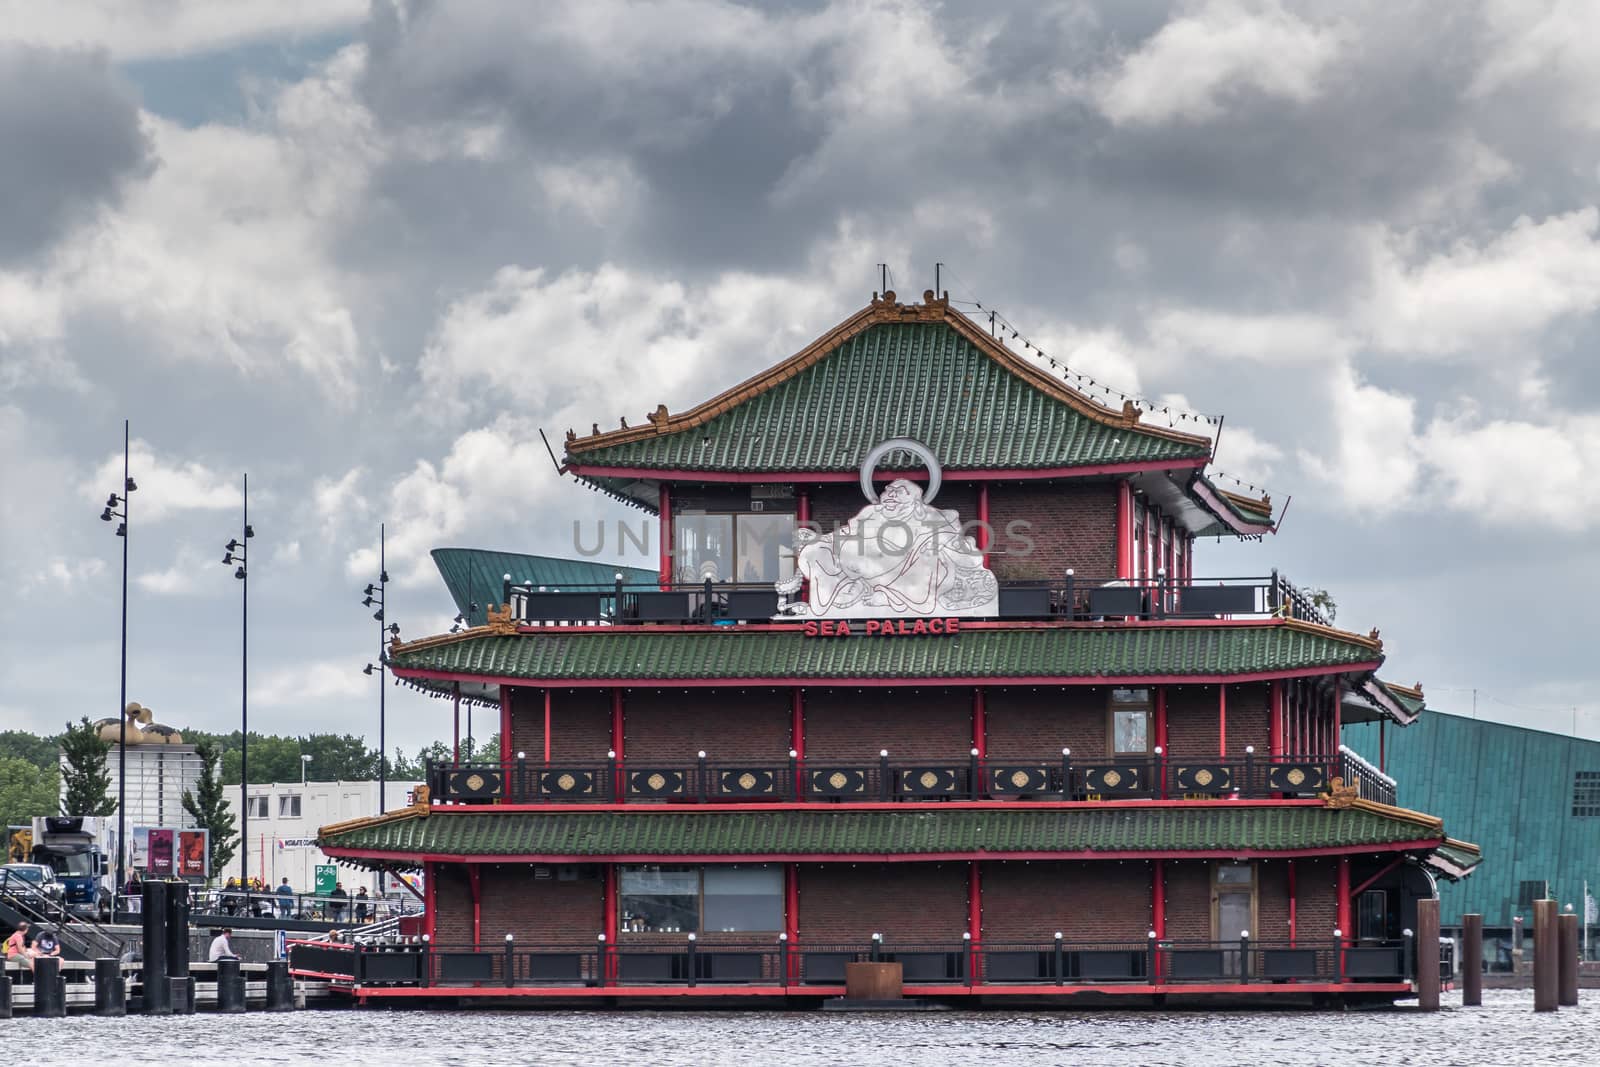 Amsterdam, the Netherlands - July 1, 2019: Red-green-brown short facade with huge white Buddha statue of Sea Palace floating restaurant at Oosterdokskade under heavy cloudscape.